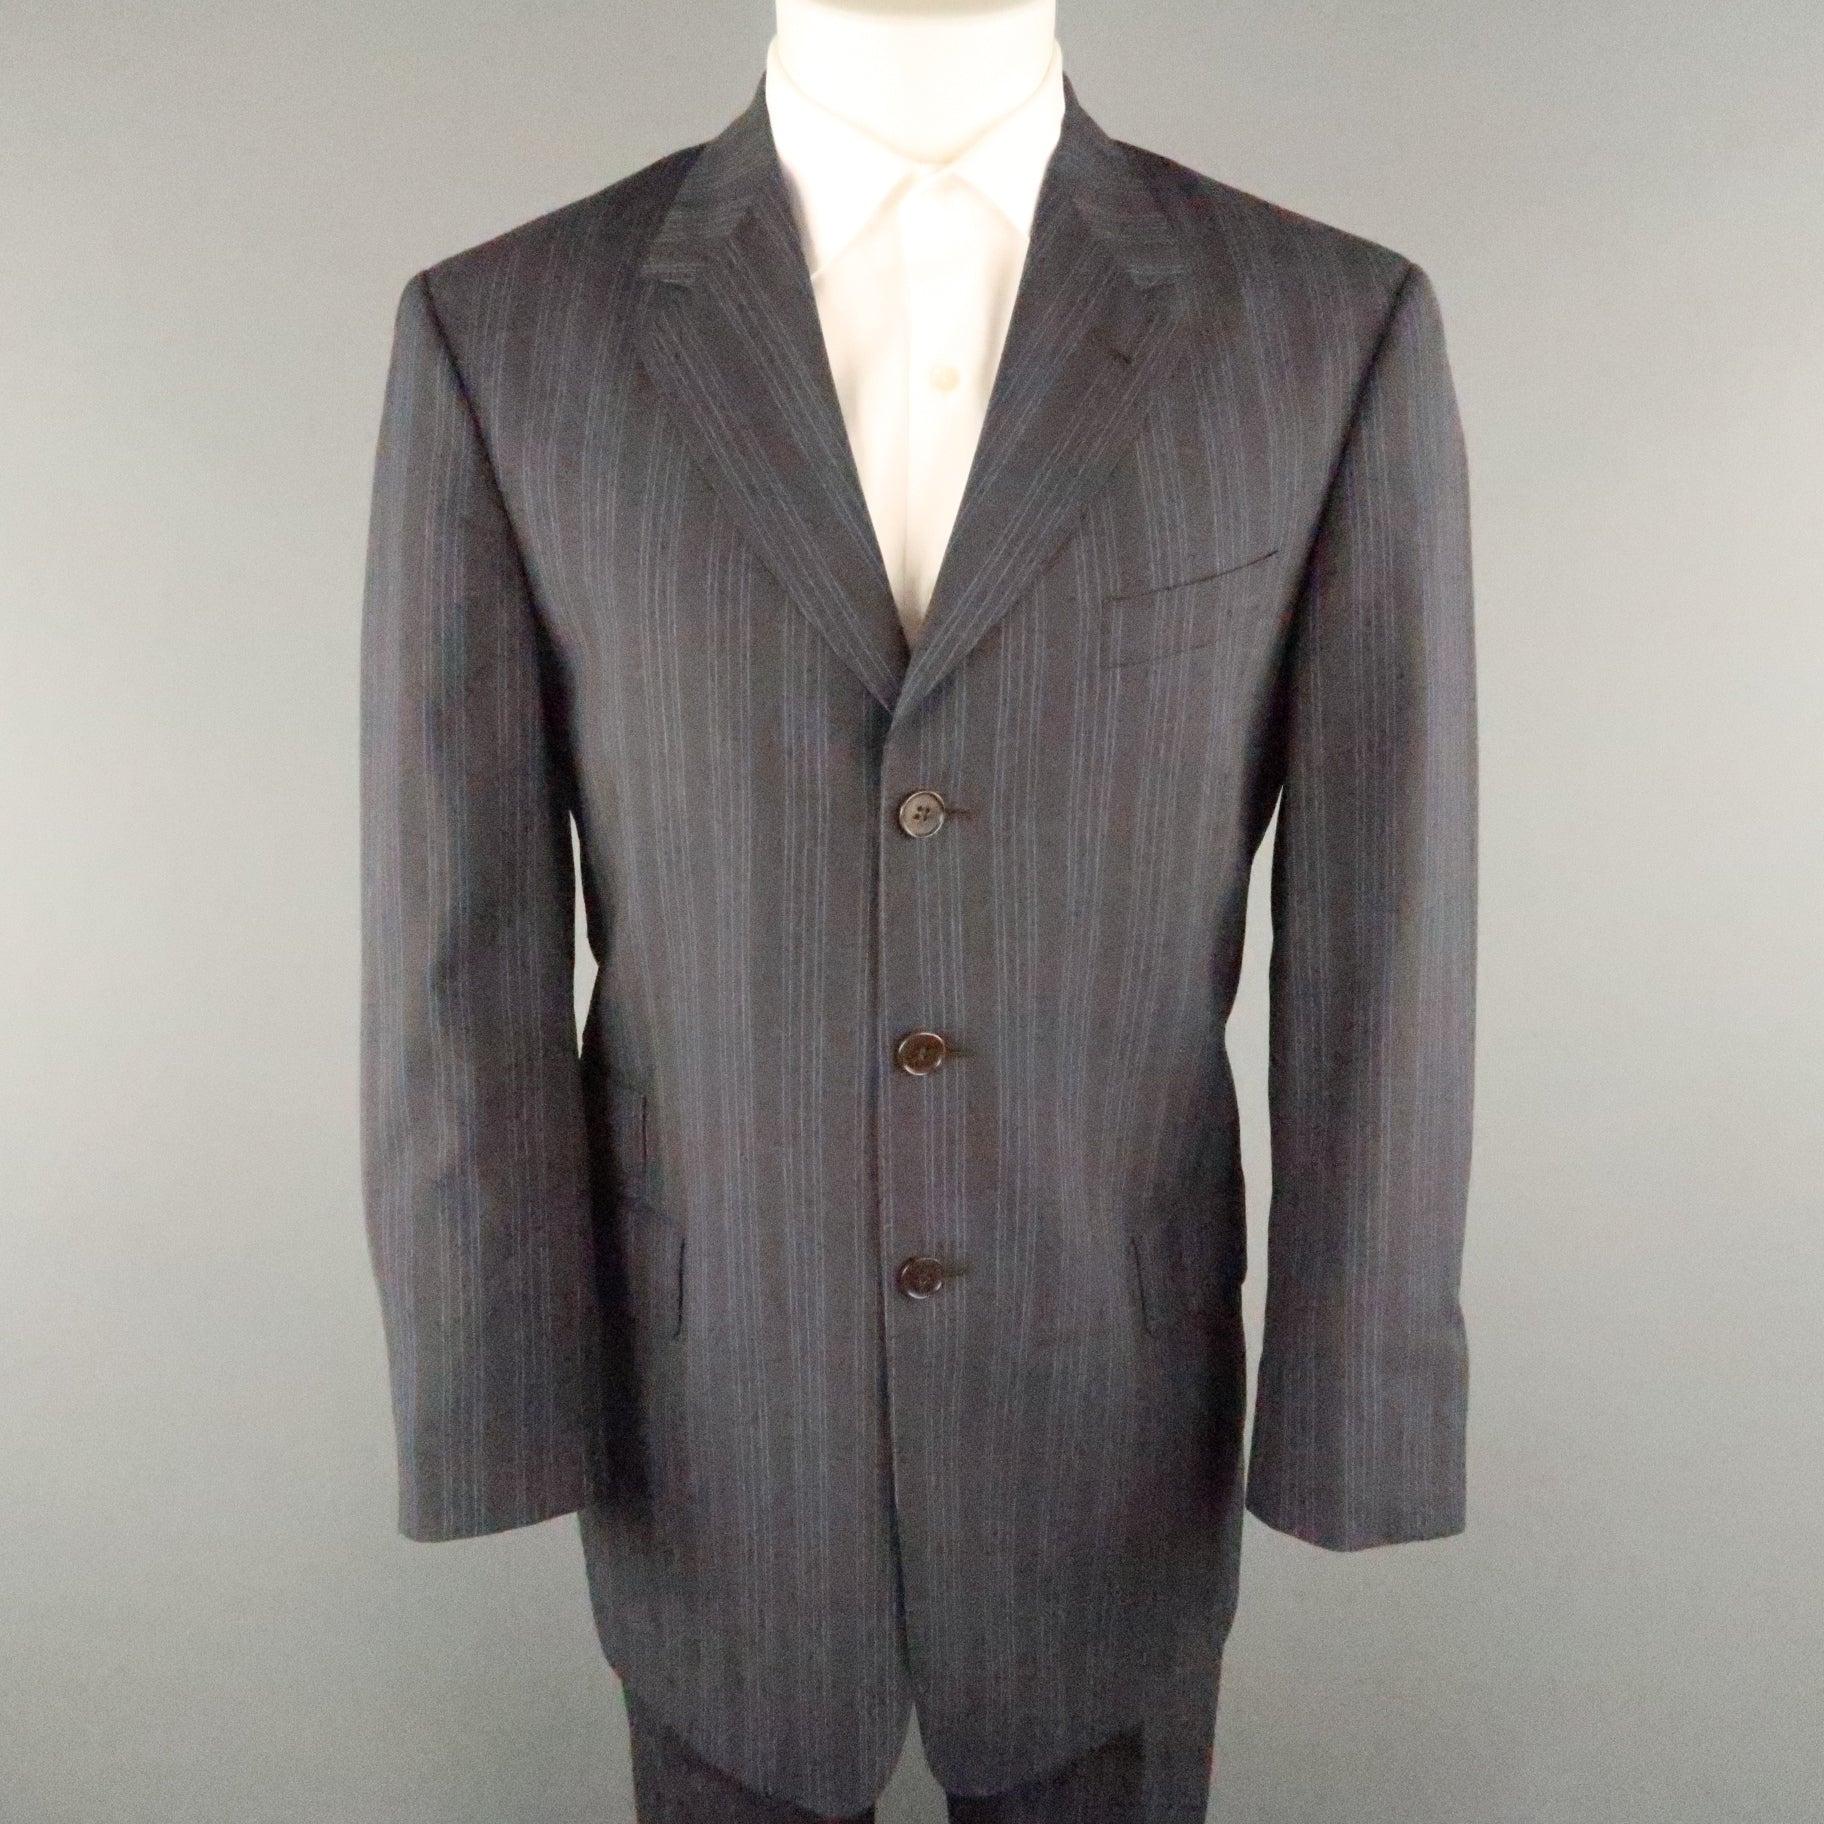 PAUL SMITH suit comes in gray and blue stripe viscose featuring a notch lapel, flap pockets, three button closure, and matching flat front style pants. Made in Italy. 
Excellent Pre-Owned Condition.
 

Marked:   40
 

Measurements: 
 